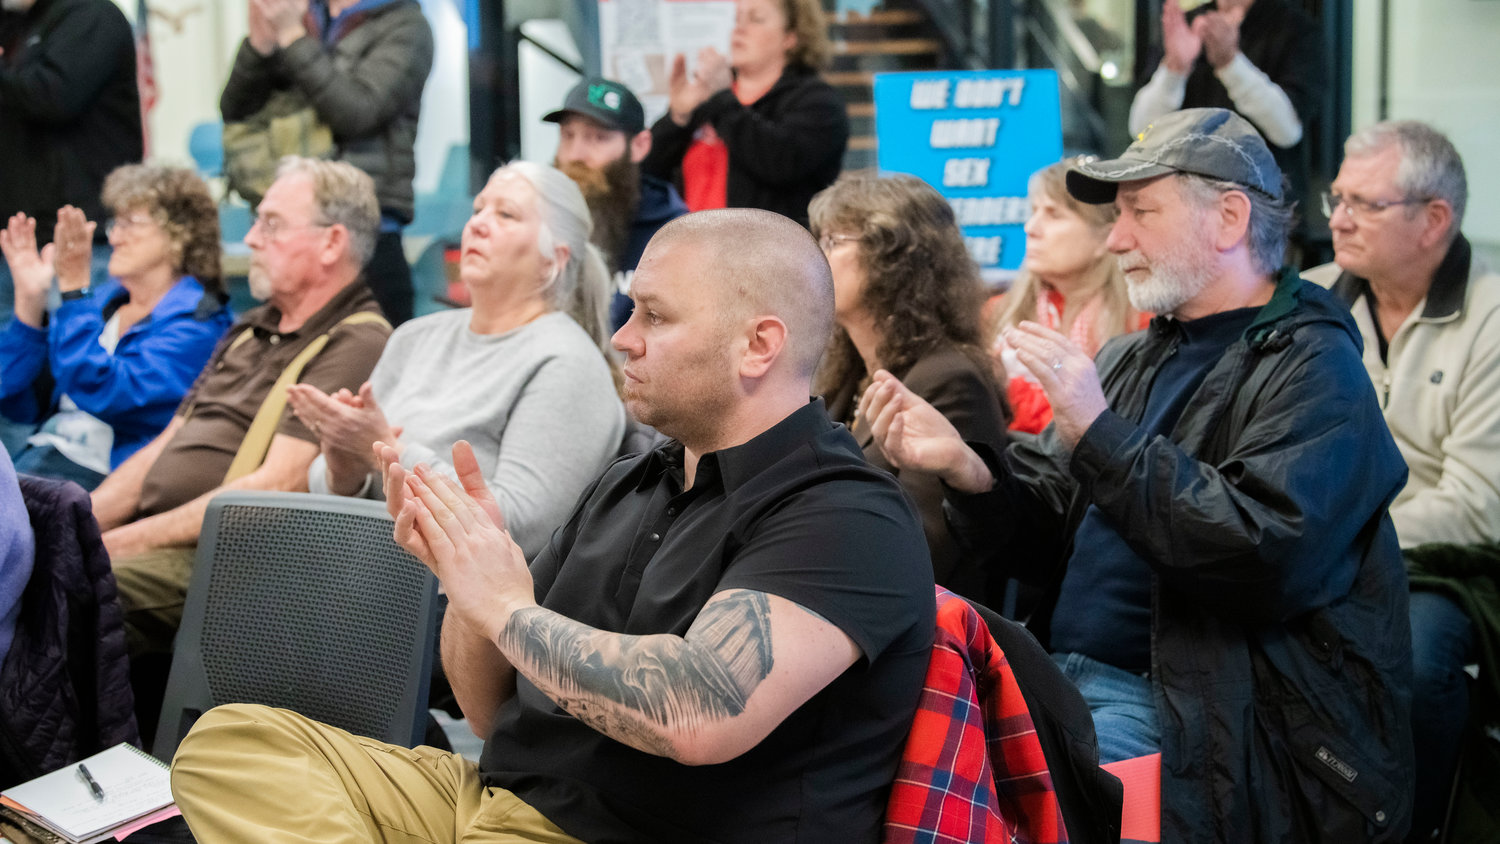 Tenino Mayor Wayne Fournier attends a meeting with Thurston County Commissioners in Olympia on Tuesday while clapping for residents speaking in opposition of a Supreme Living facility located at 2813 140th Avenue Southwest in Tenino.